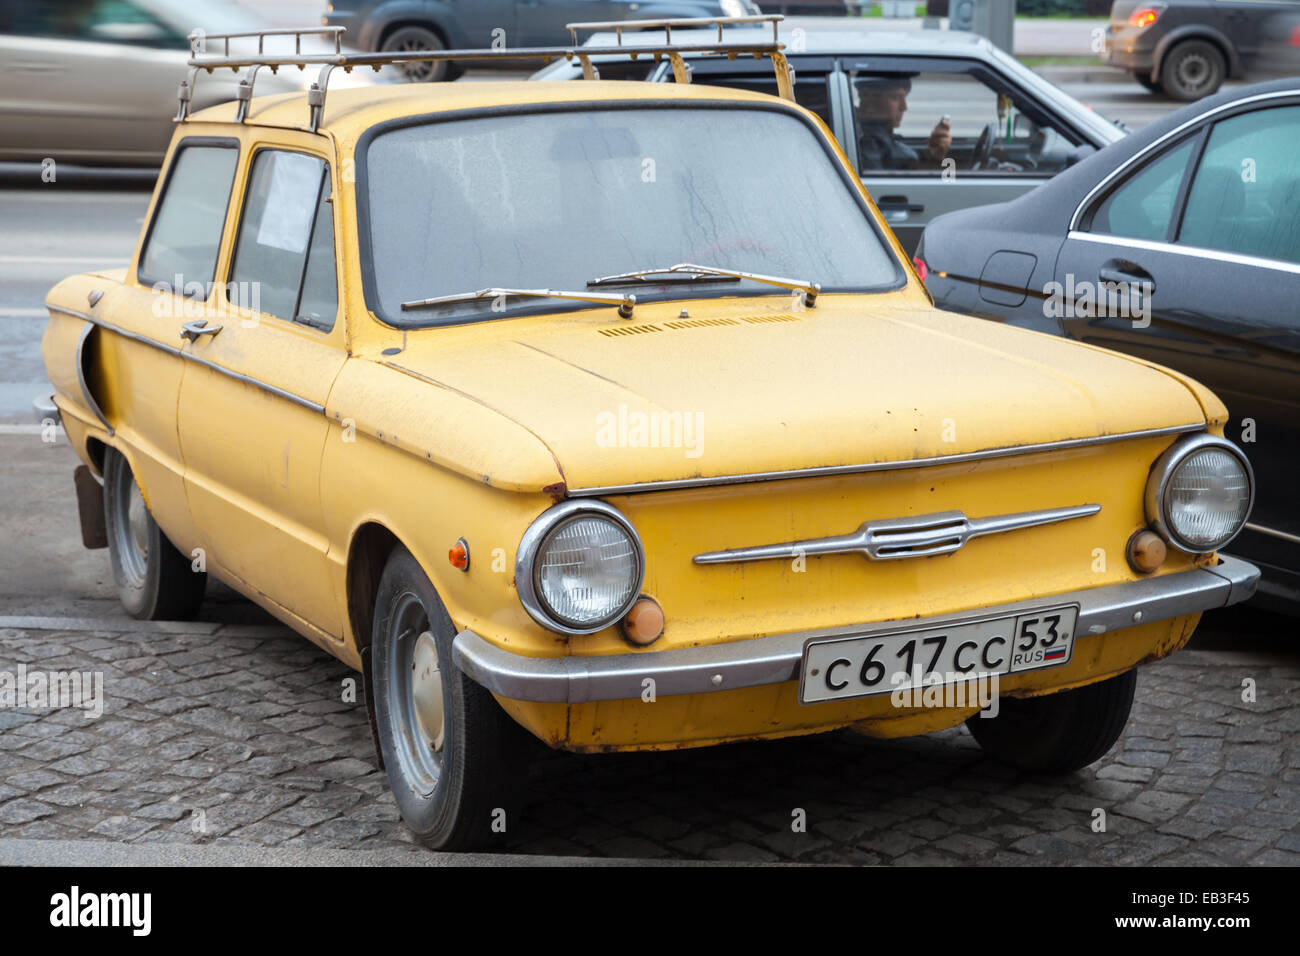 Saint-Petersburg, Russia - November 15, 2014: old yellow soviet Zaz 968 car stands parked on the roadside Stock Photo